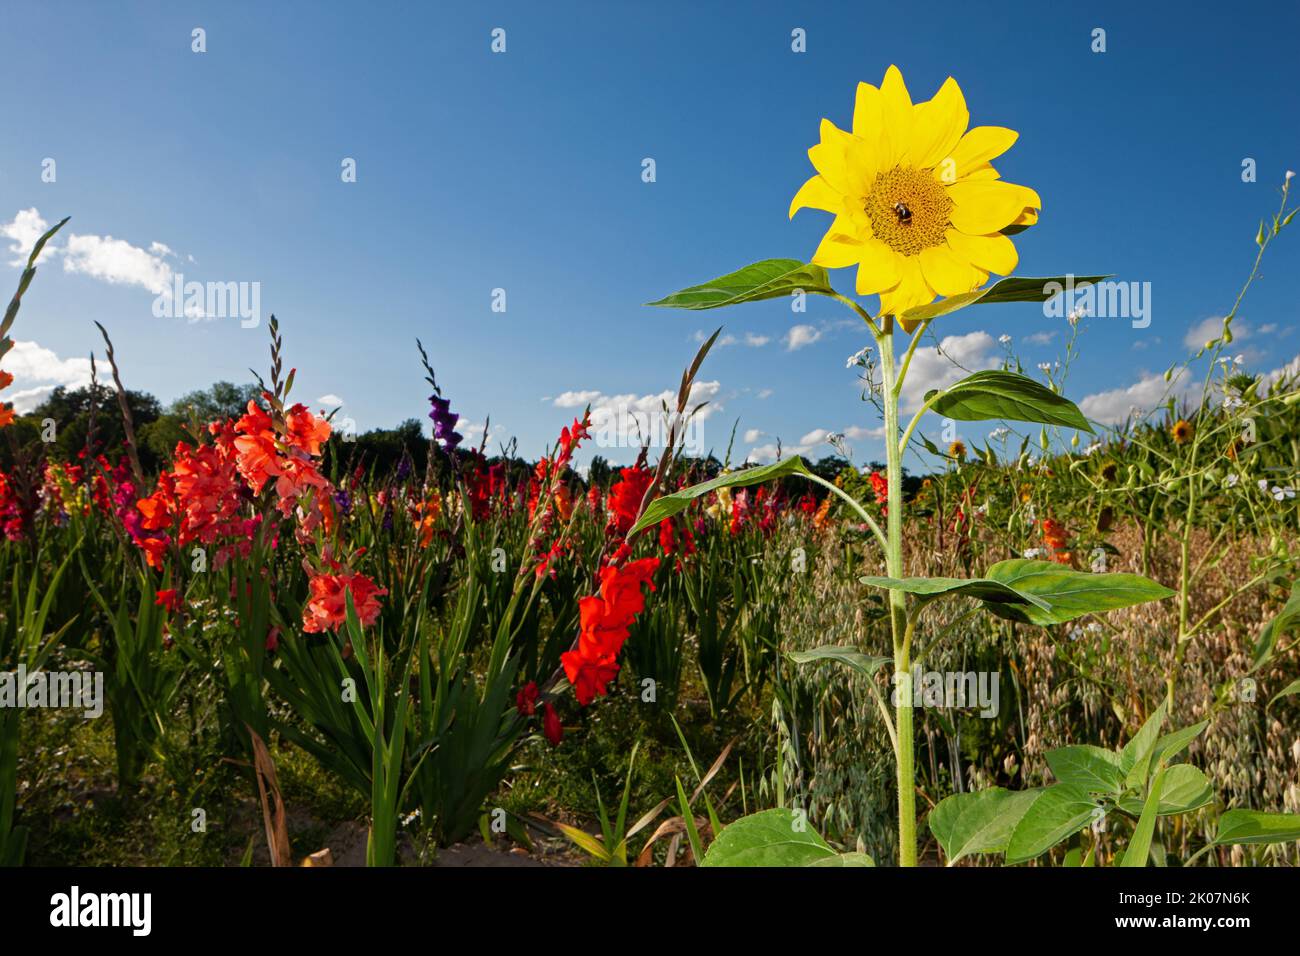 Sunflowers (Helianthus annuus), family Asteraceae, and sword lilies (Gladiolus), family Iridaceae, Leer, East Frisia, Germany Stock Photo